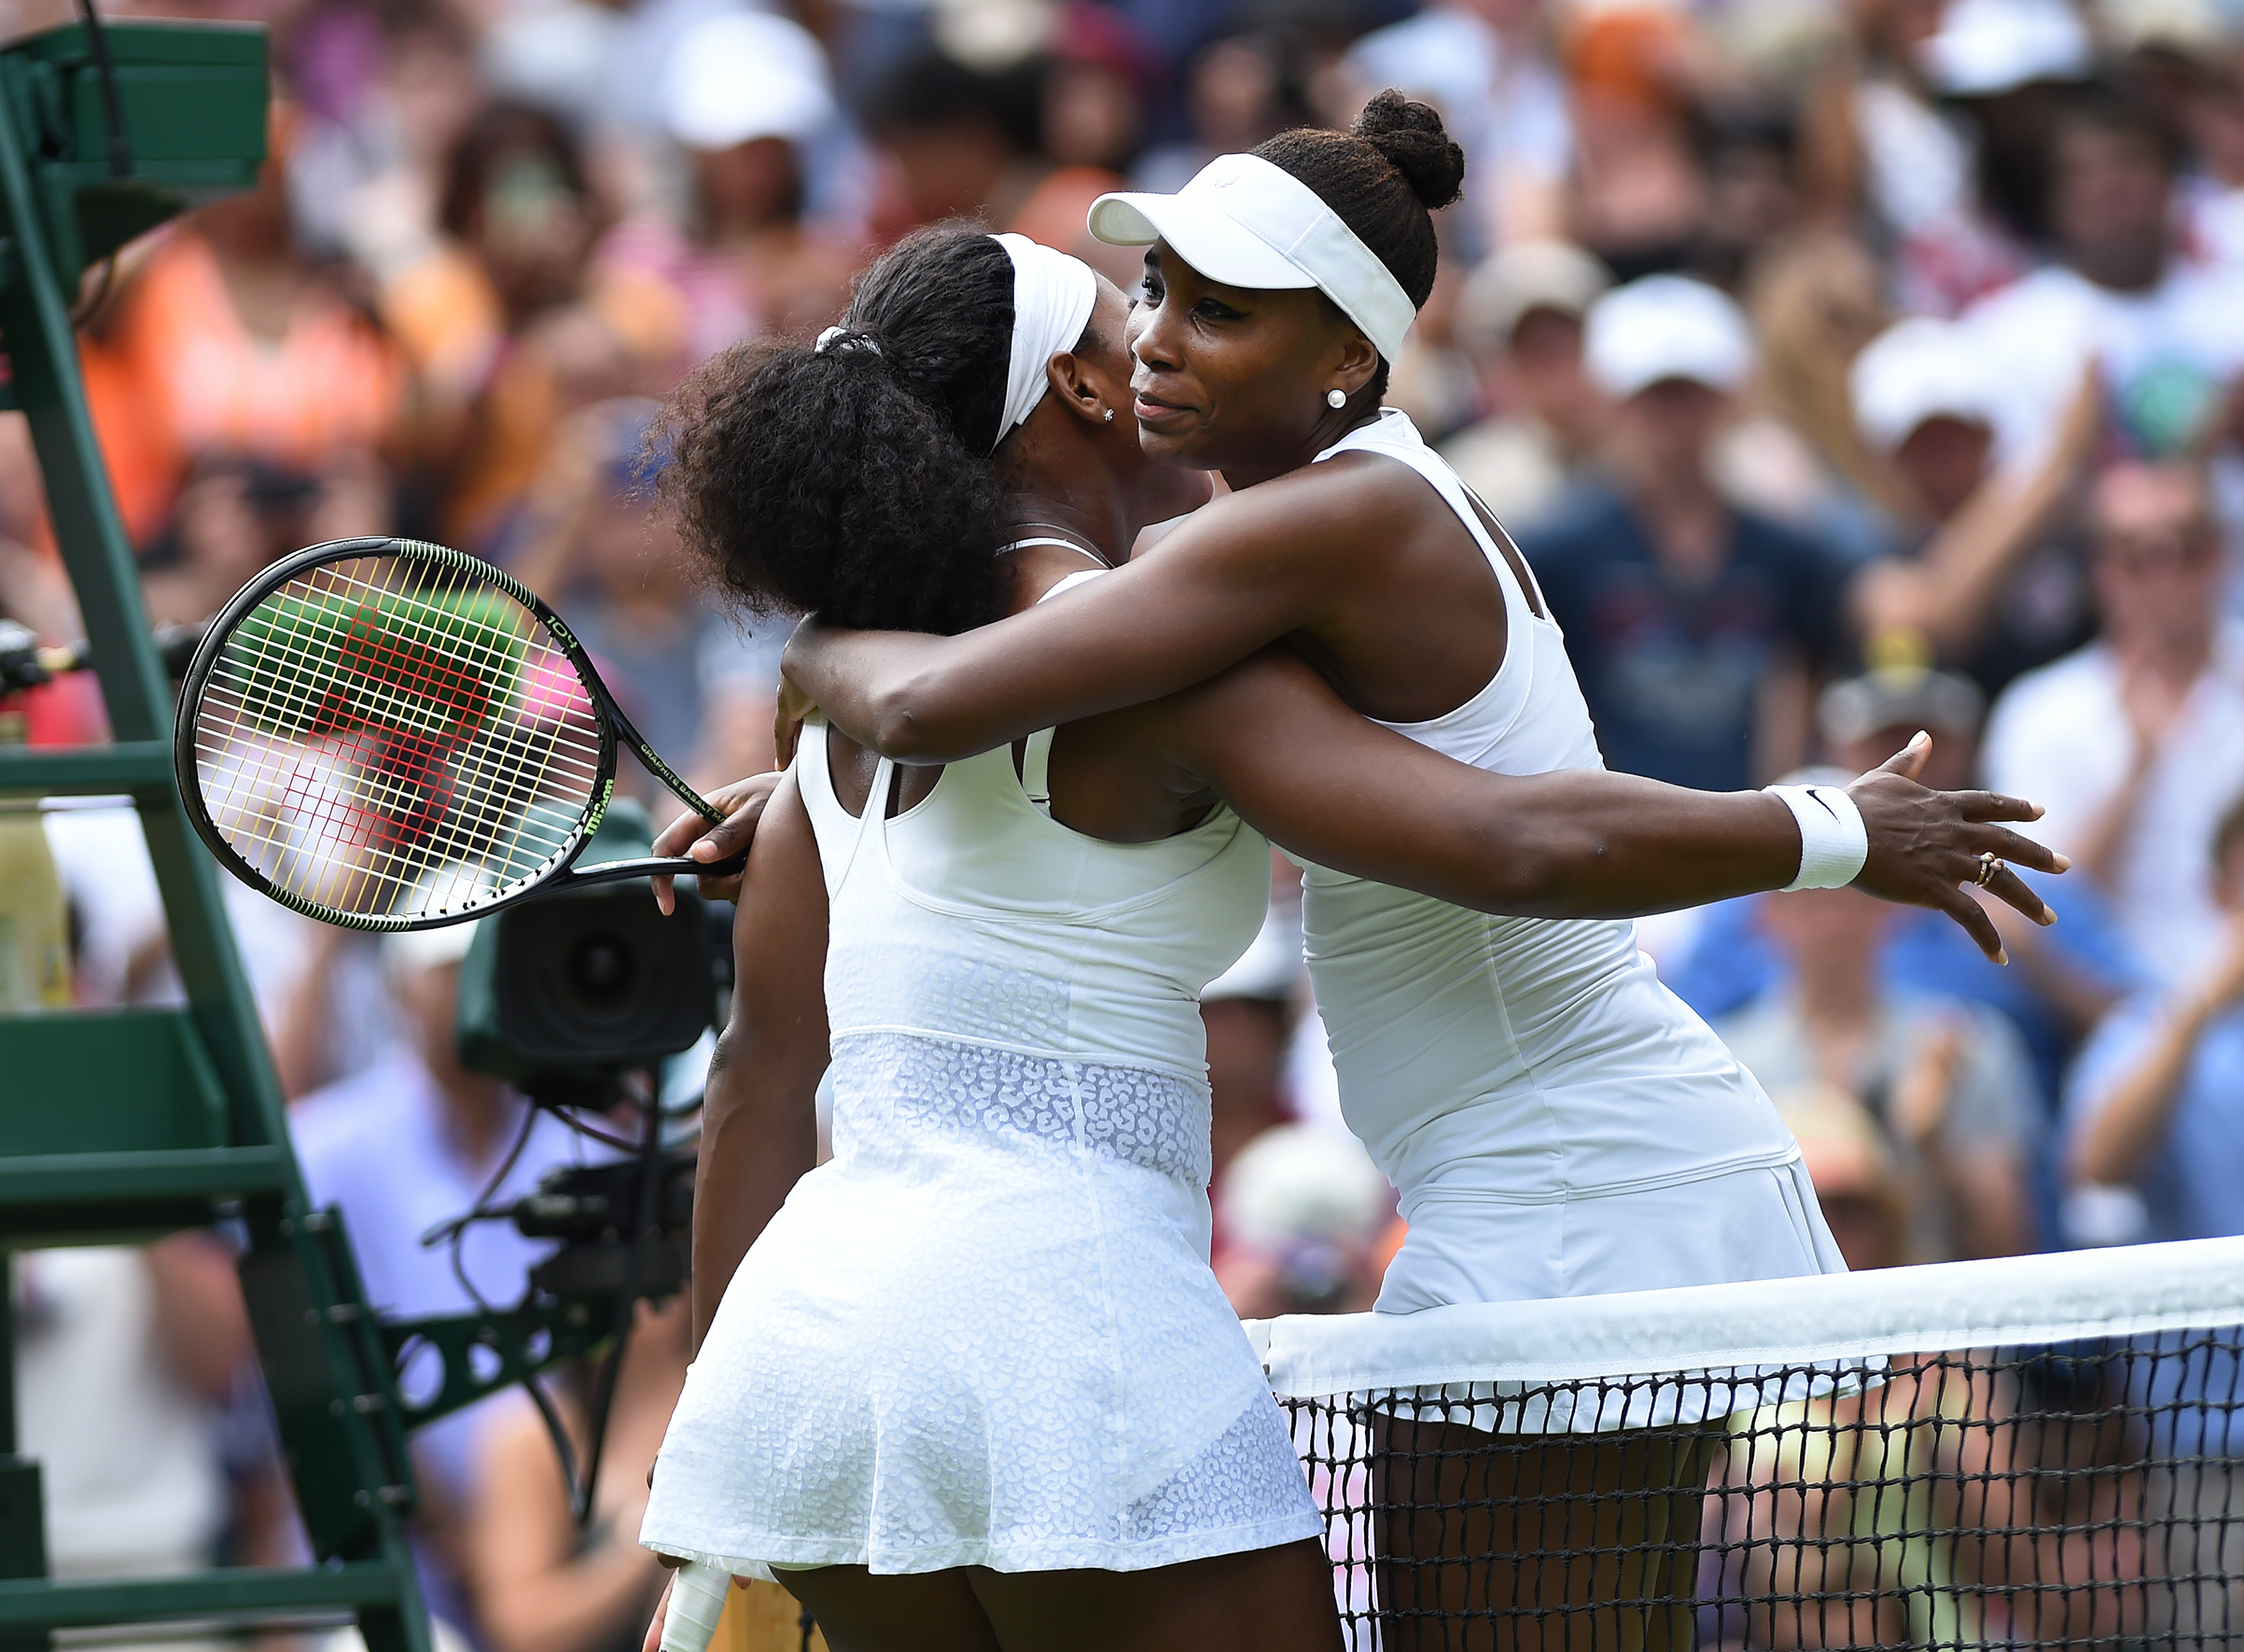 Venus Williams of USA embraces her sister after her fourth round match against Serena Williams of USA on Day Seven of the 2015 Wimbledon Lawn Tennis Championships at the All England Lawn Tennis and Croquet Club in London, UK. (Visionhaus—Corbis/Getty Images)